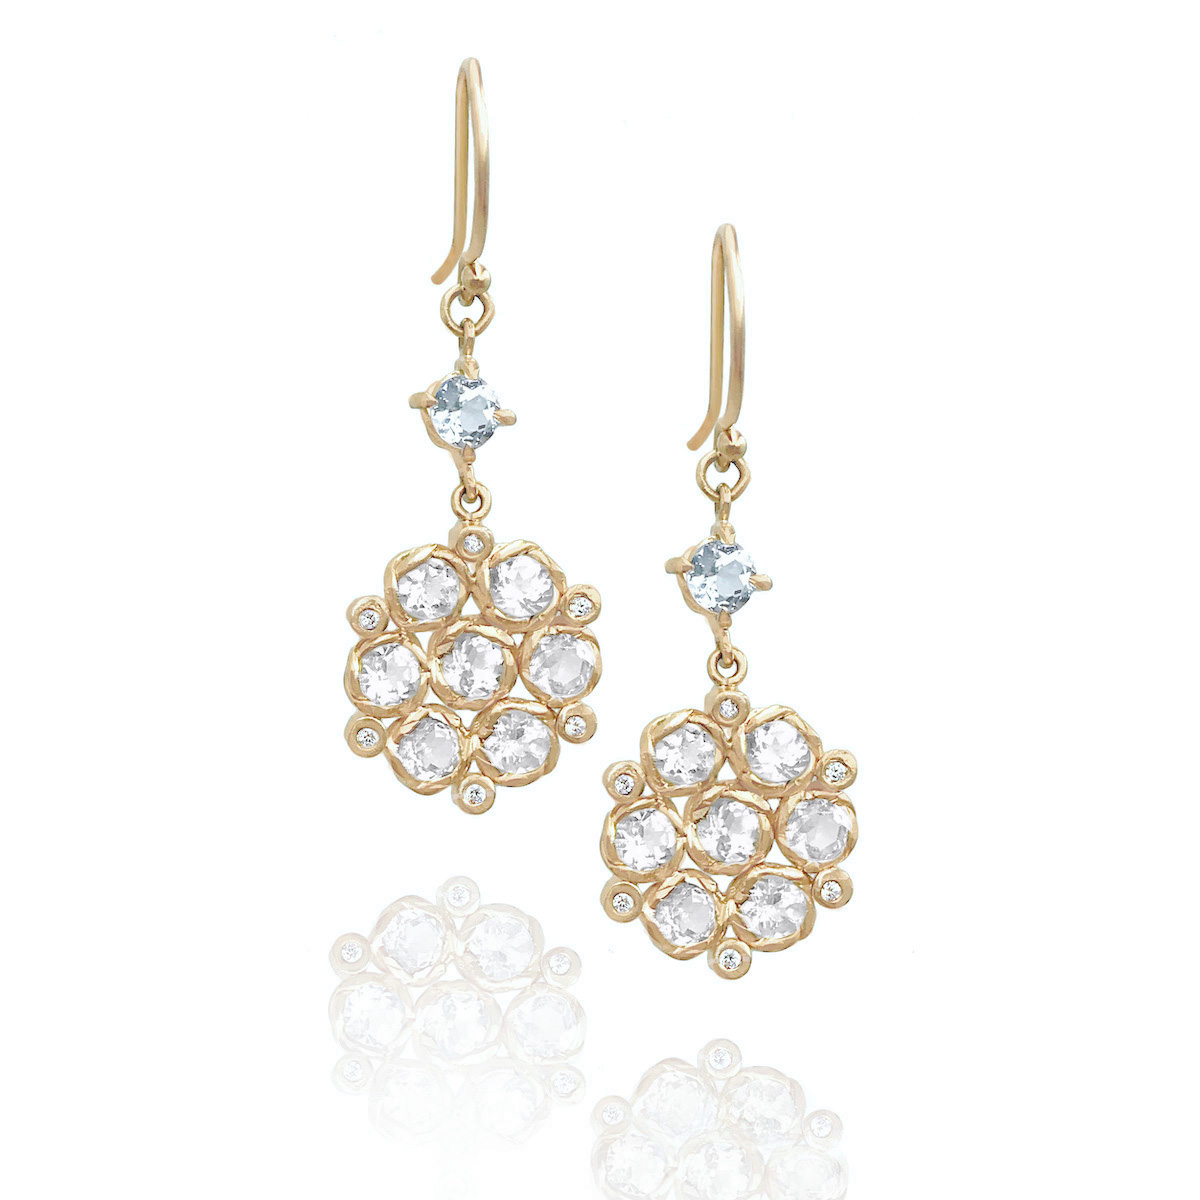 aquamarine-accent-white-zircon-floral-drop-earrings-jewelyrie-14k-18k-YG